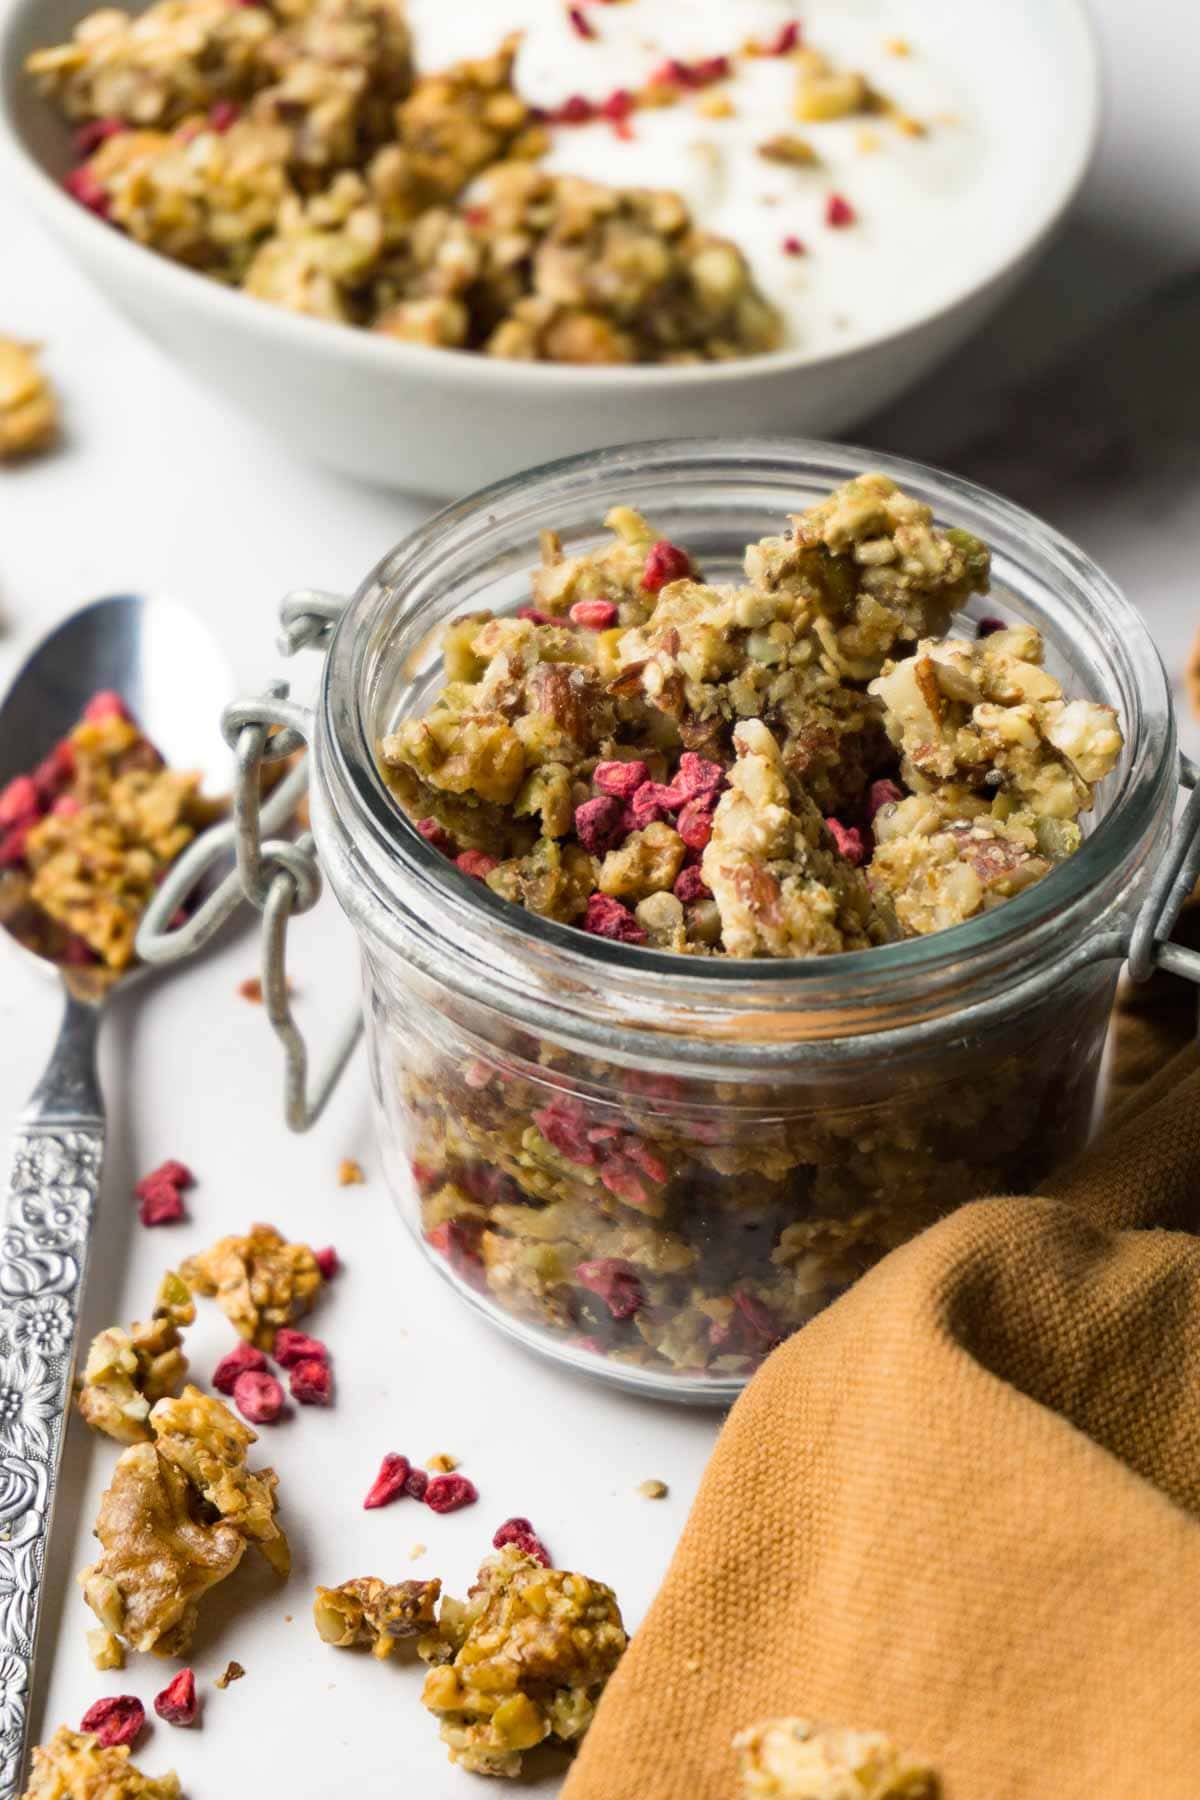 A glass jar full of low carb granola with freeze-dried raspberries, a bowl with yoghurt and granola on the background.